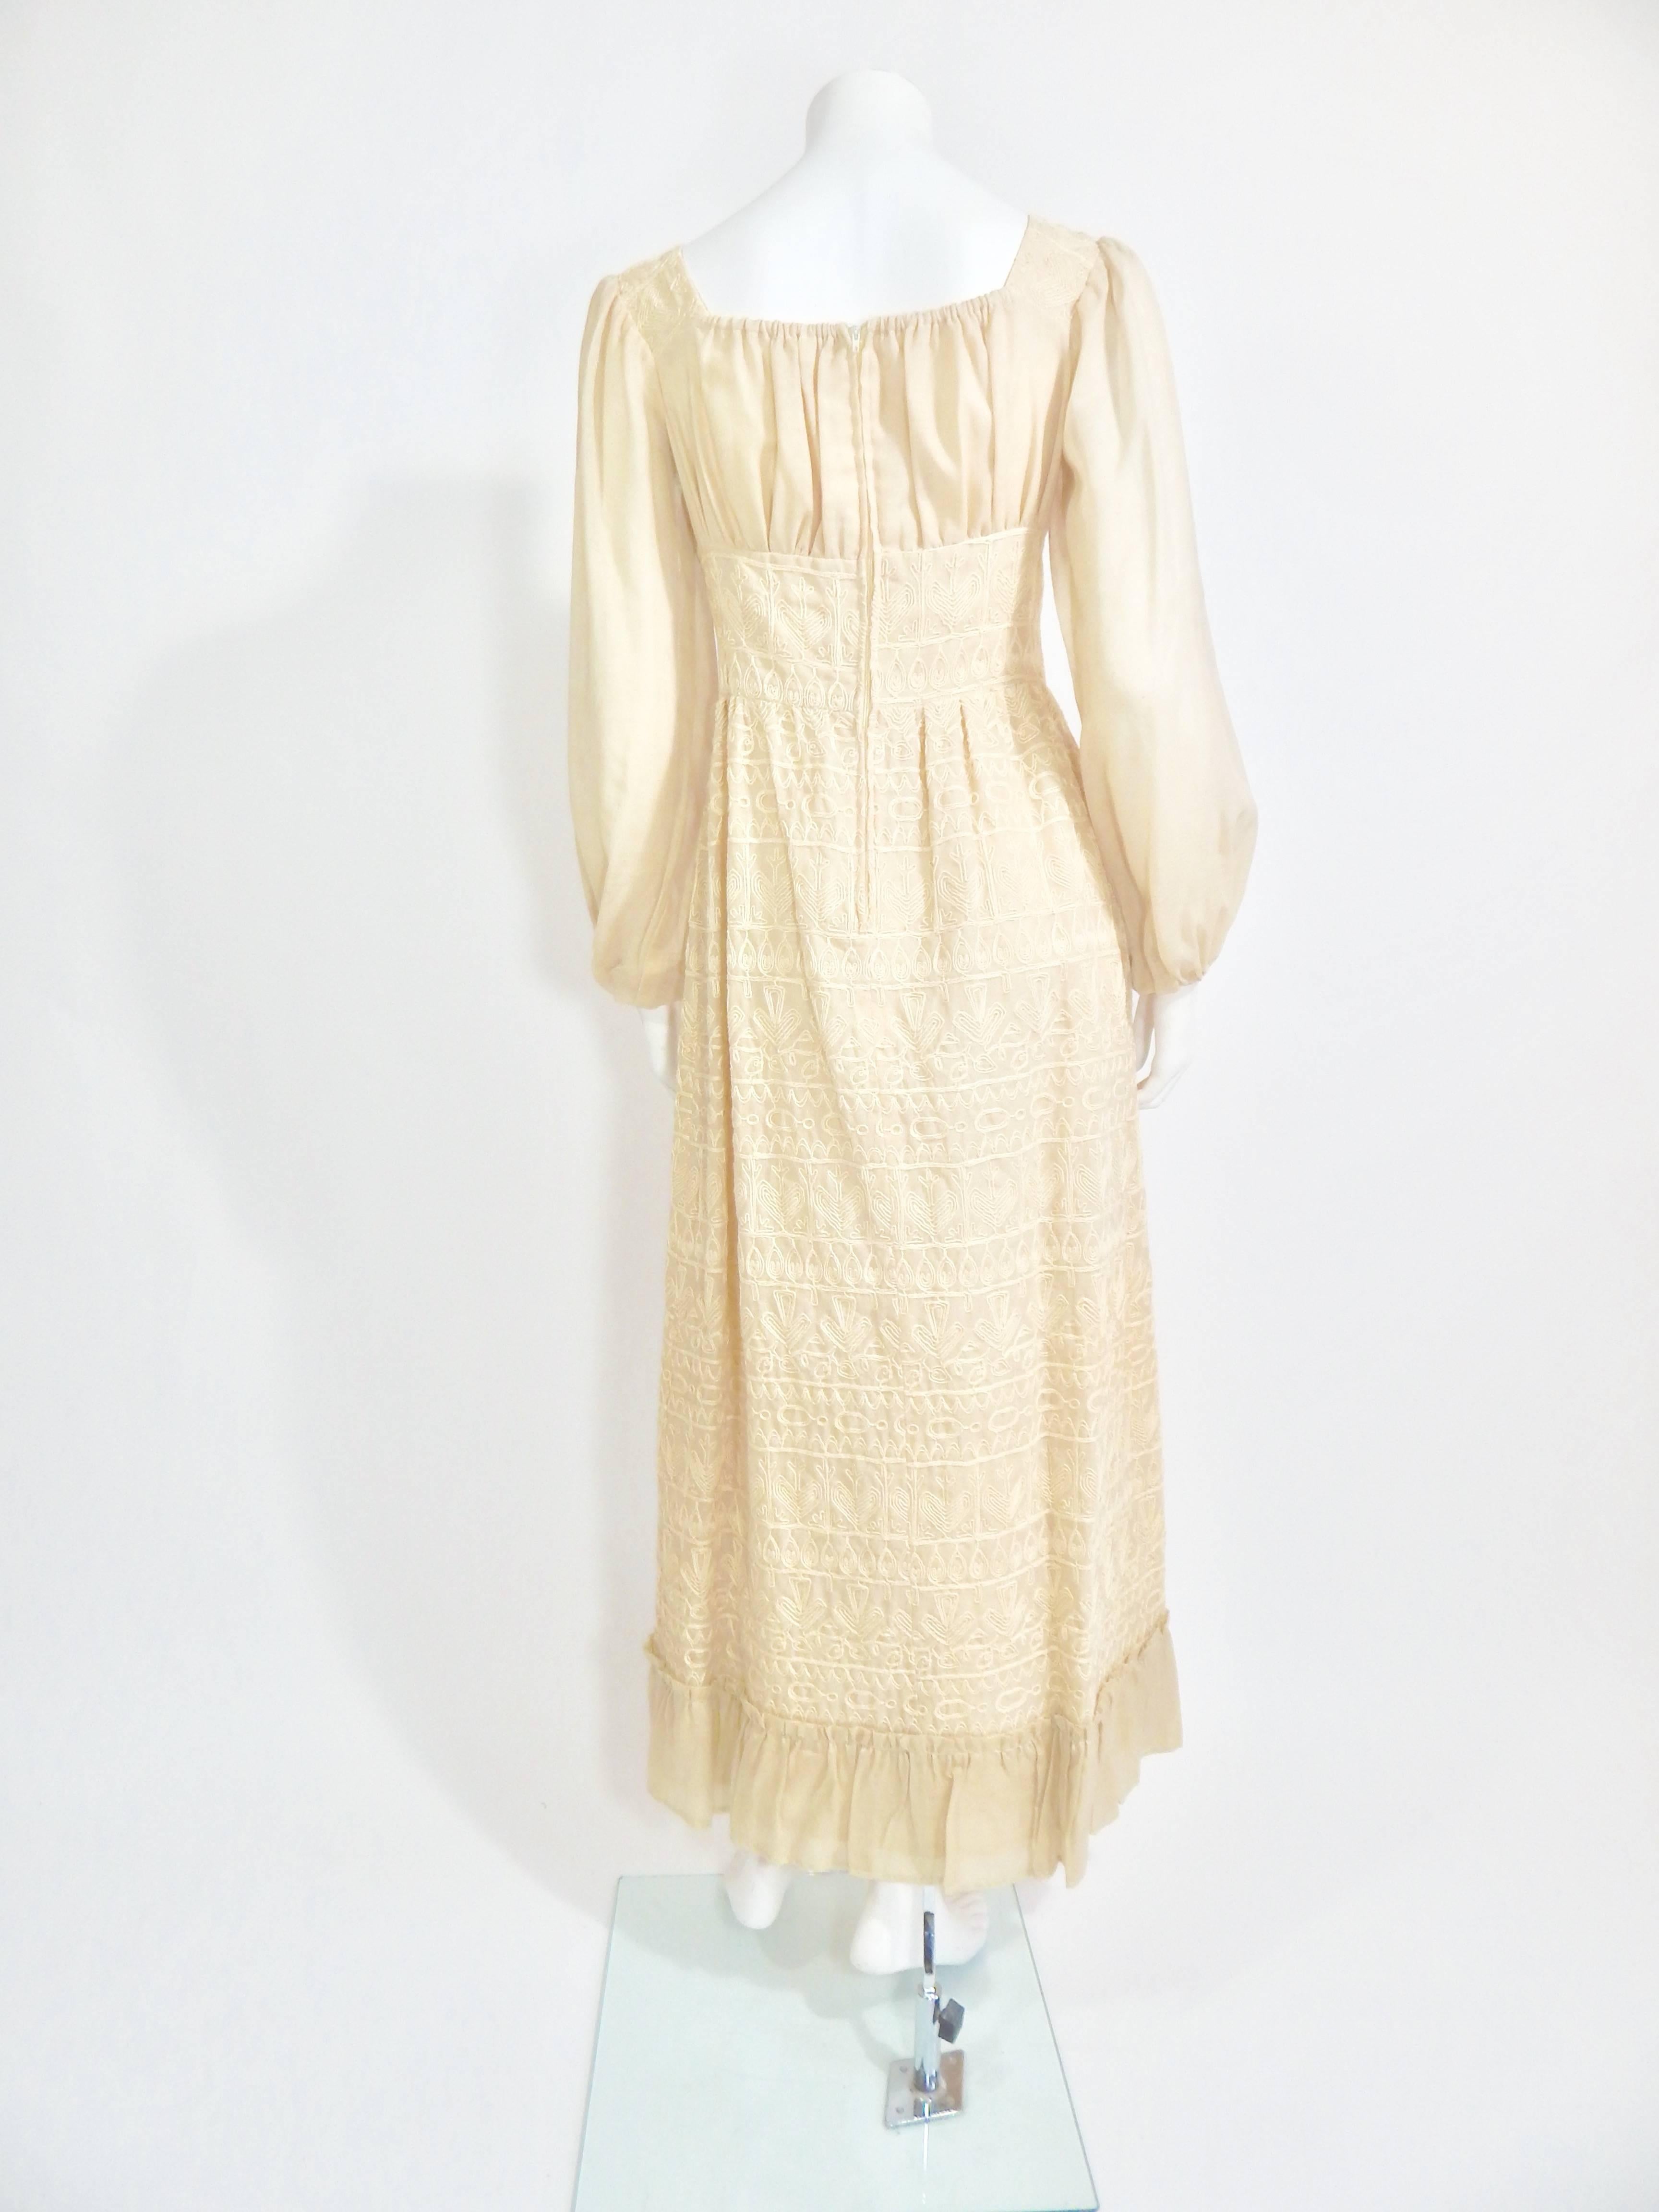 Women's 1970s Bohemian Embroidered Maxi Dress For Sale